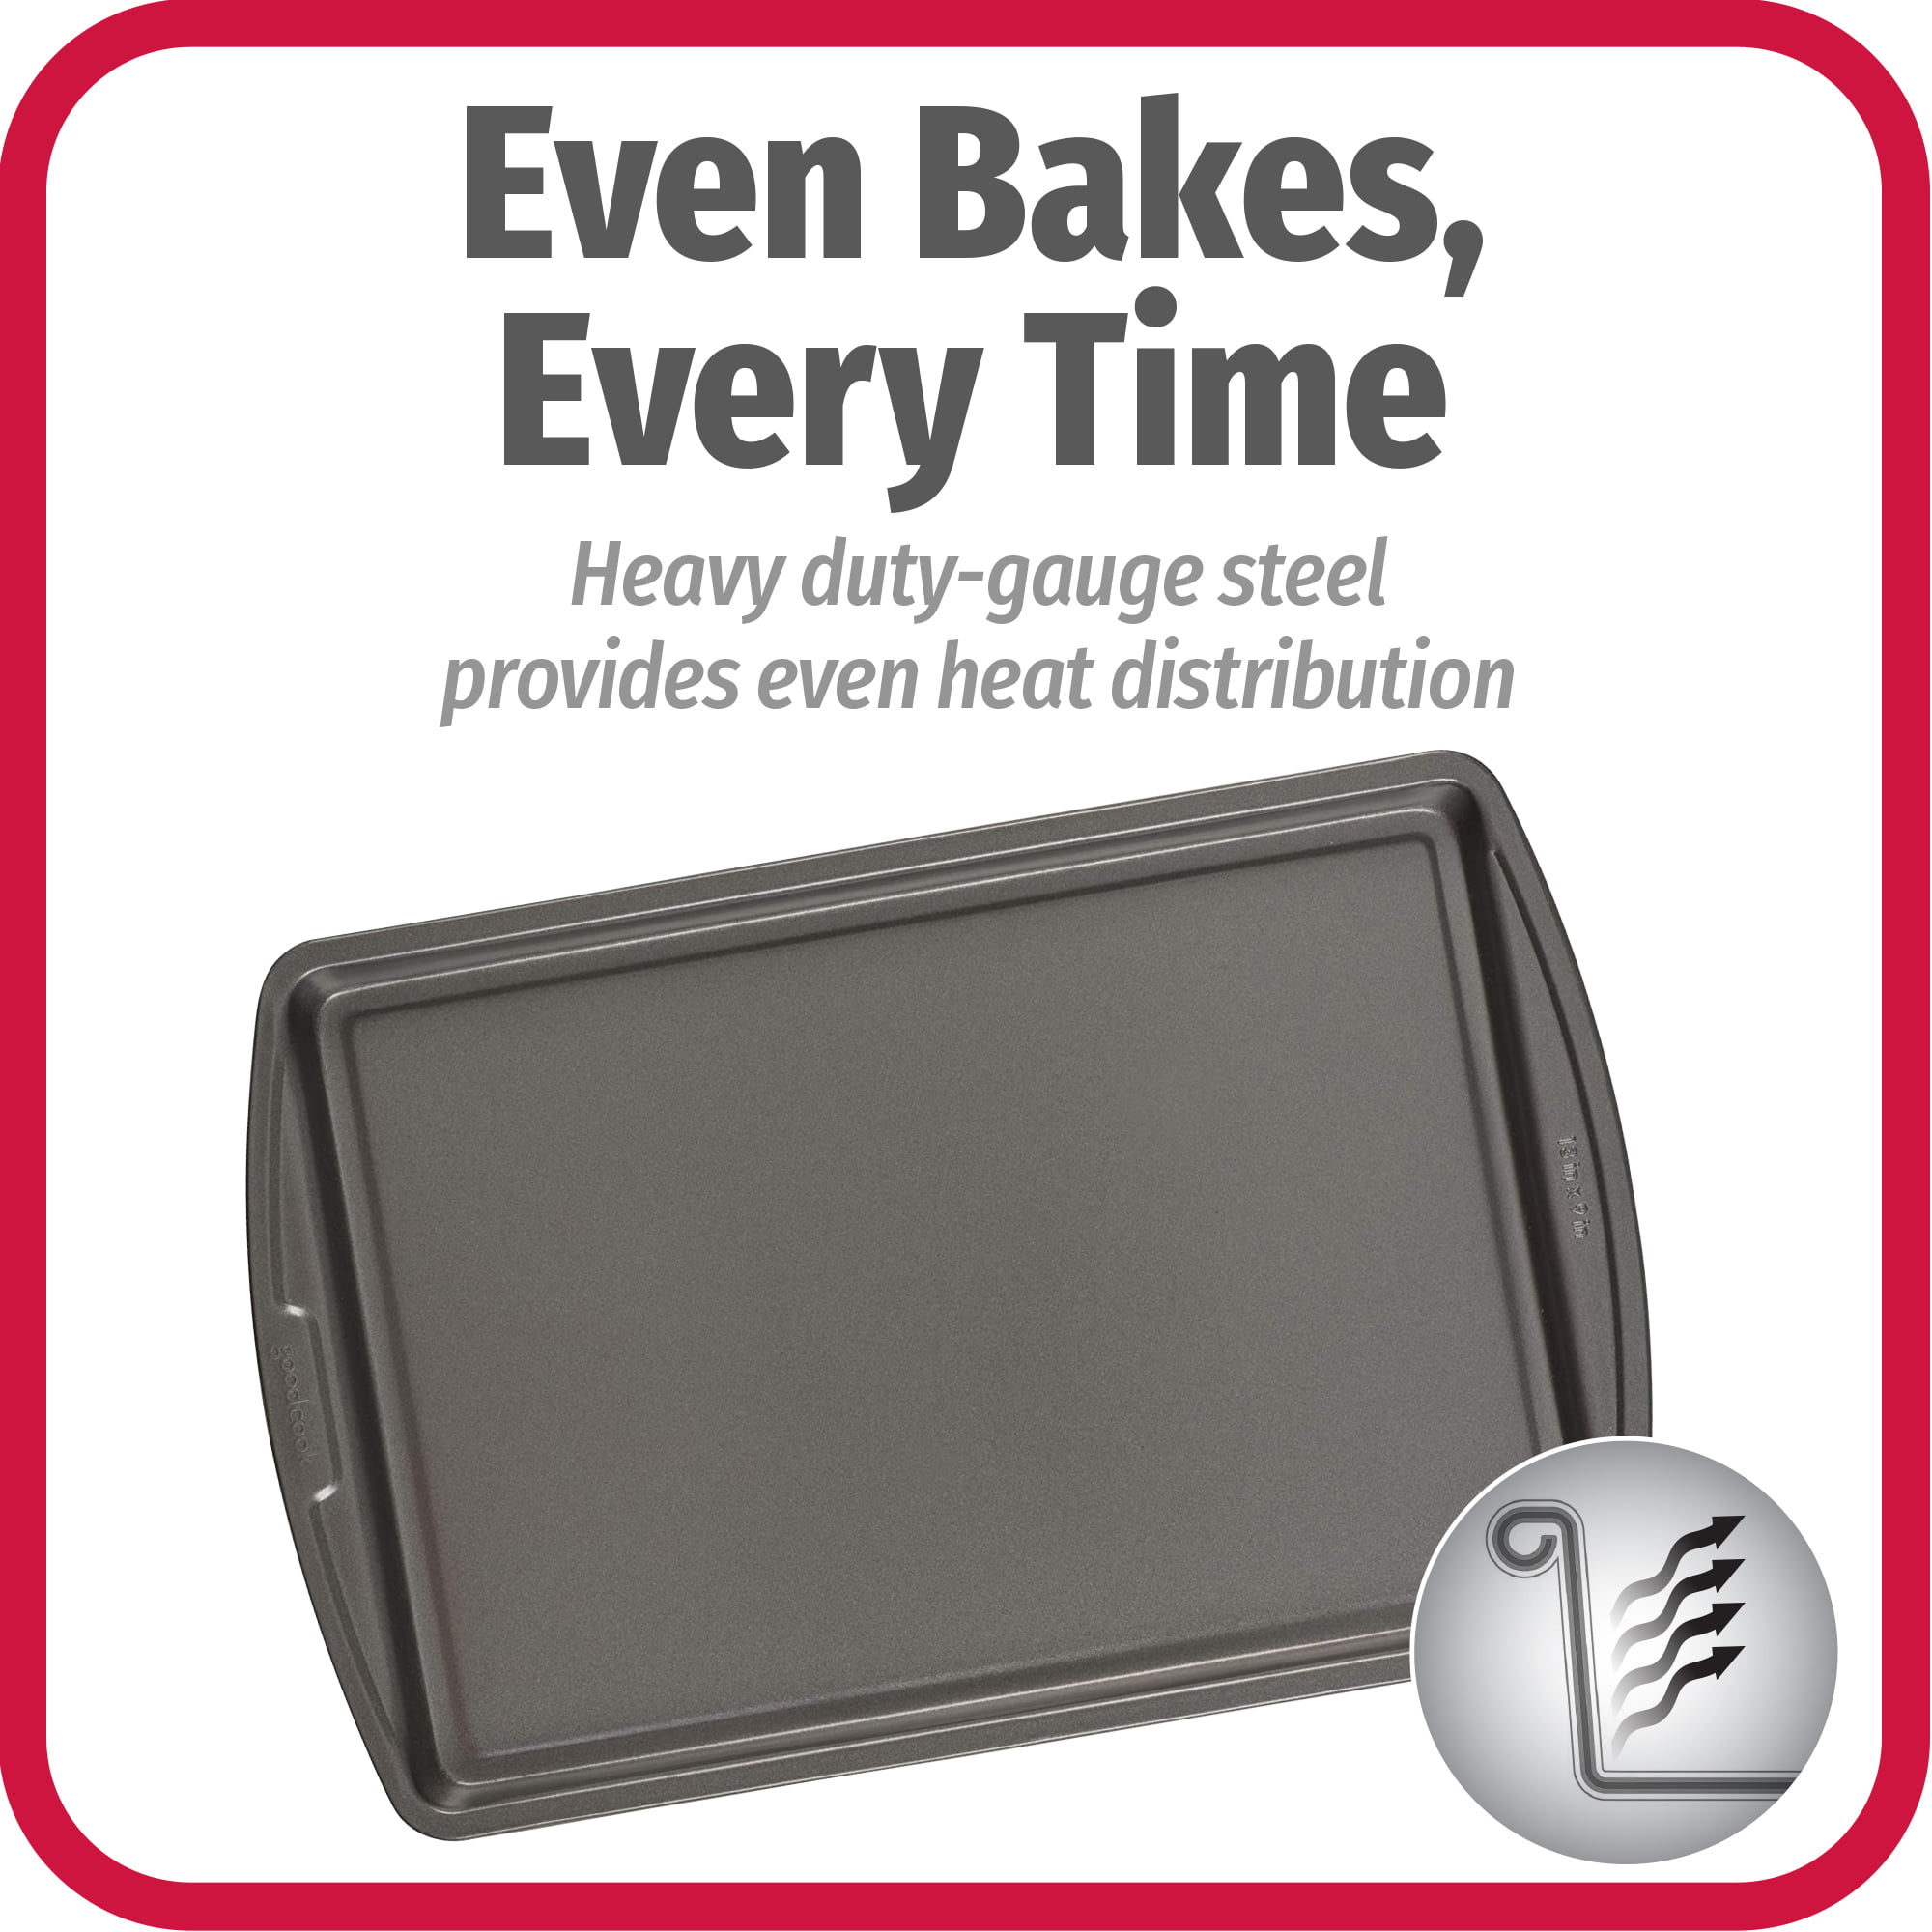 Bakers Advantage Nonstick Cookie Sheet, 13-Inch 